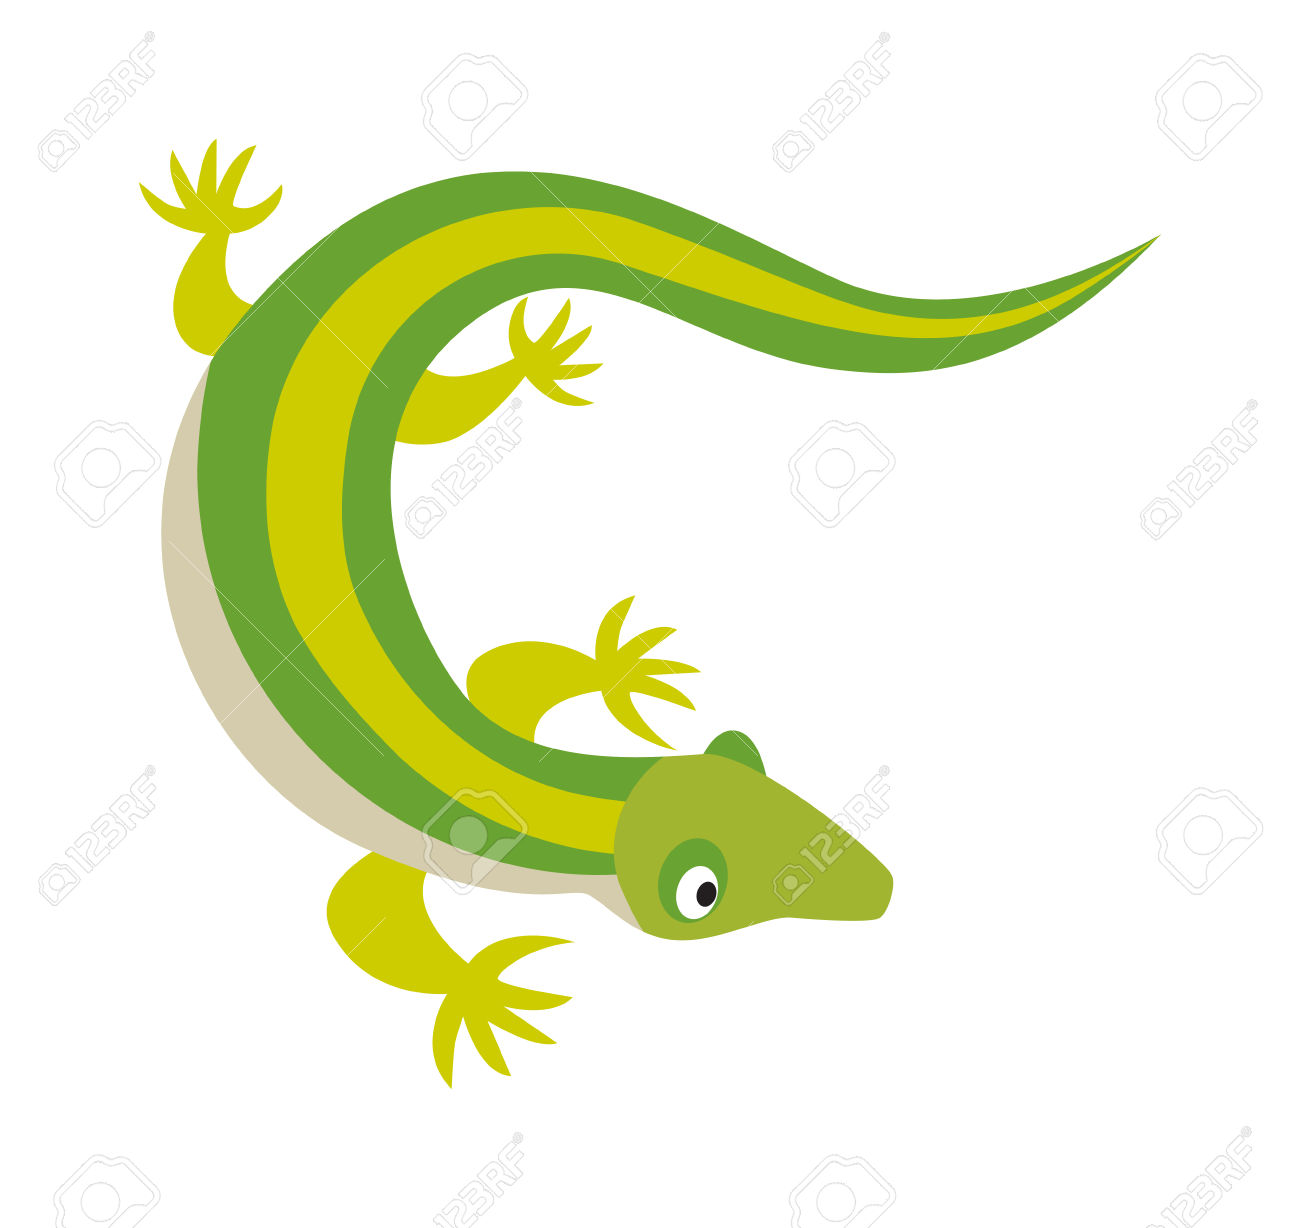 Green Water Dragon Stock Photos Images. 2,856 Royalty Free Green.